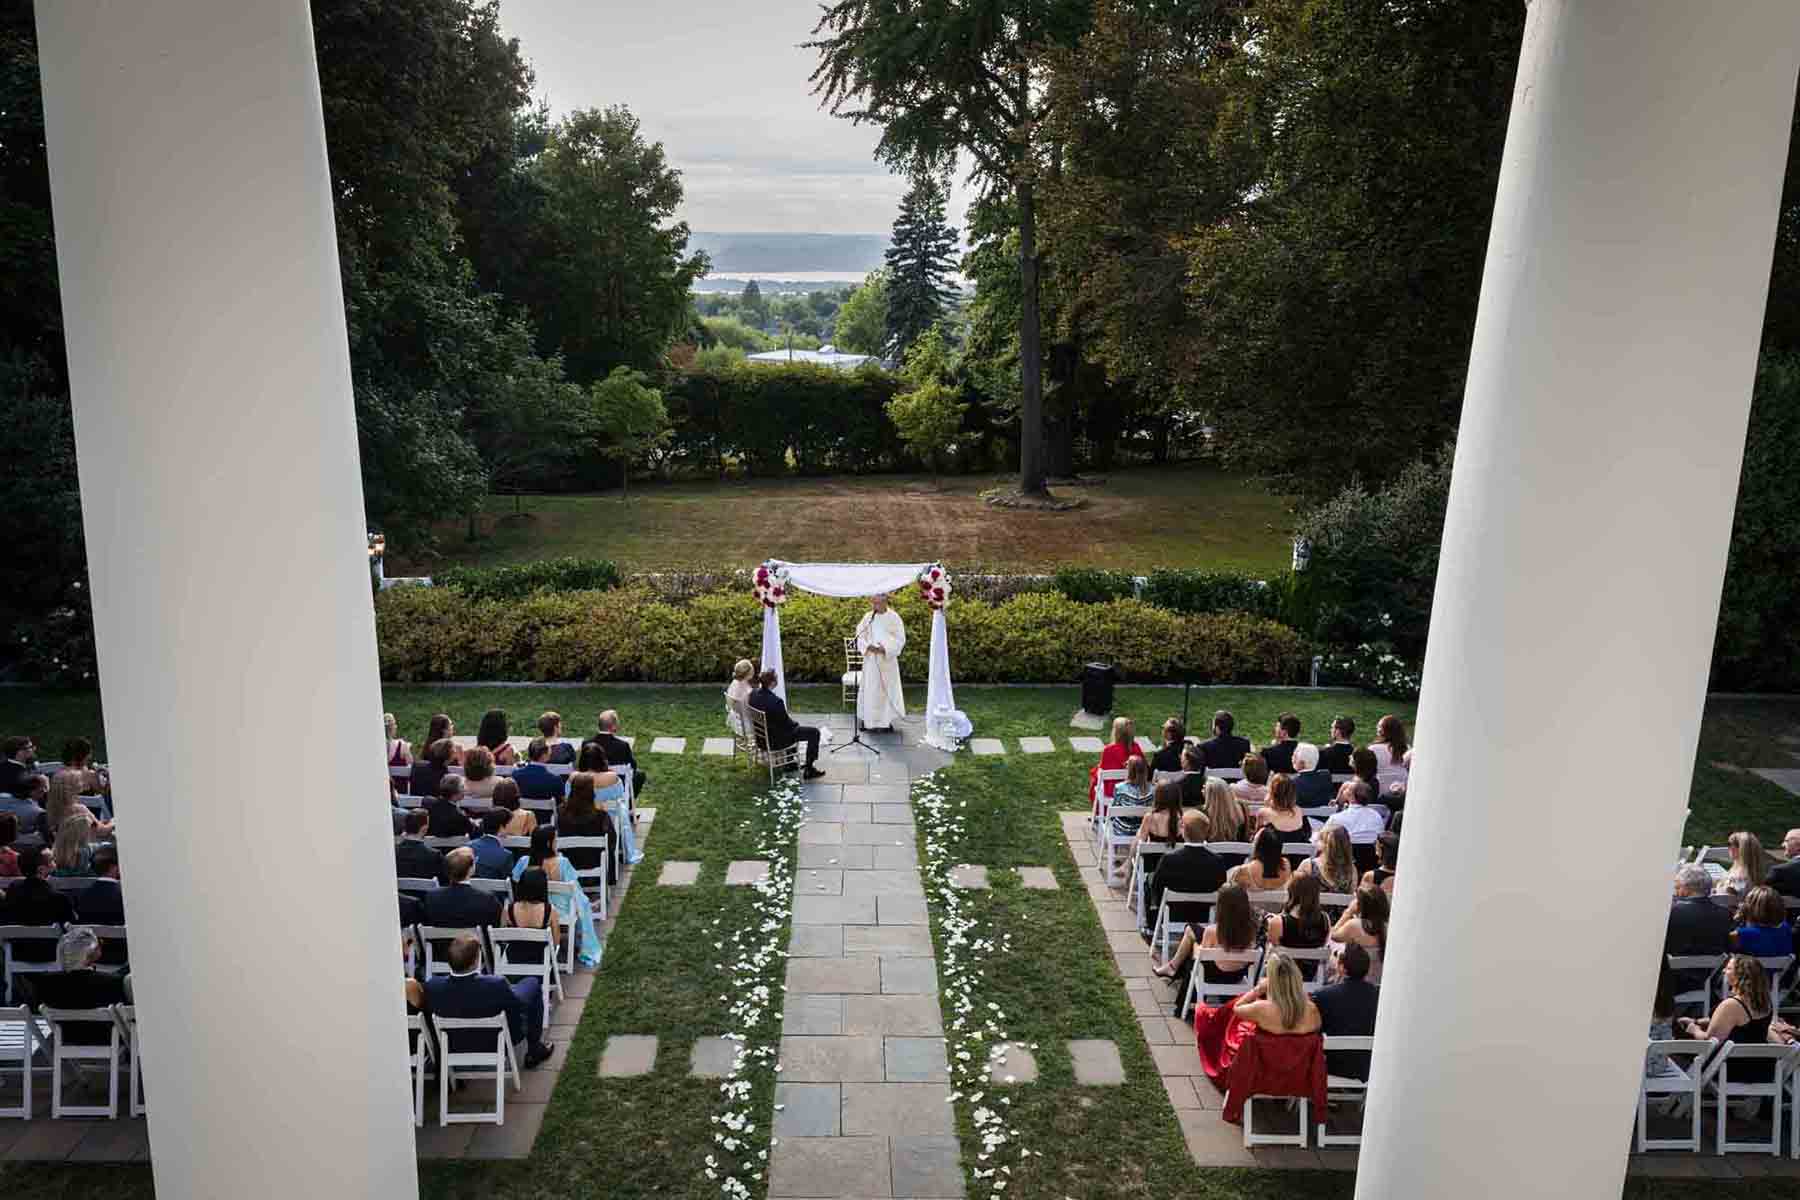 Second floor view of outdoor ceremony at a Briarcliff Manor wedding